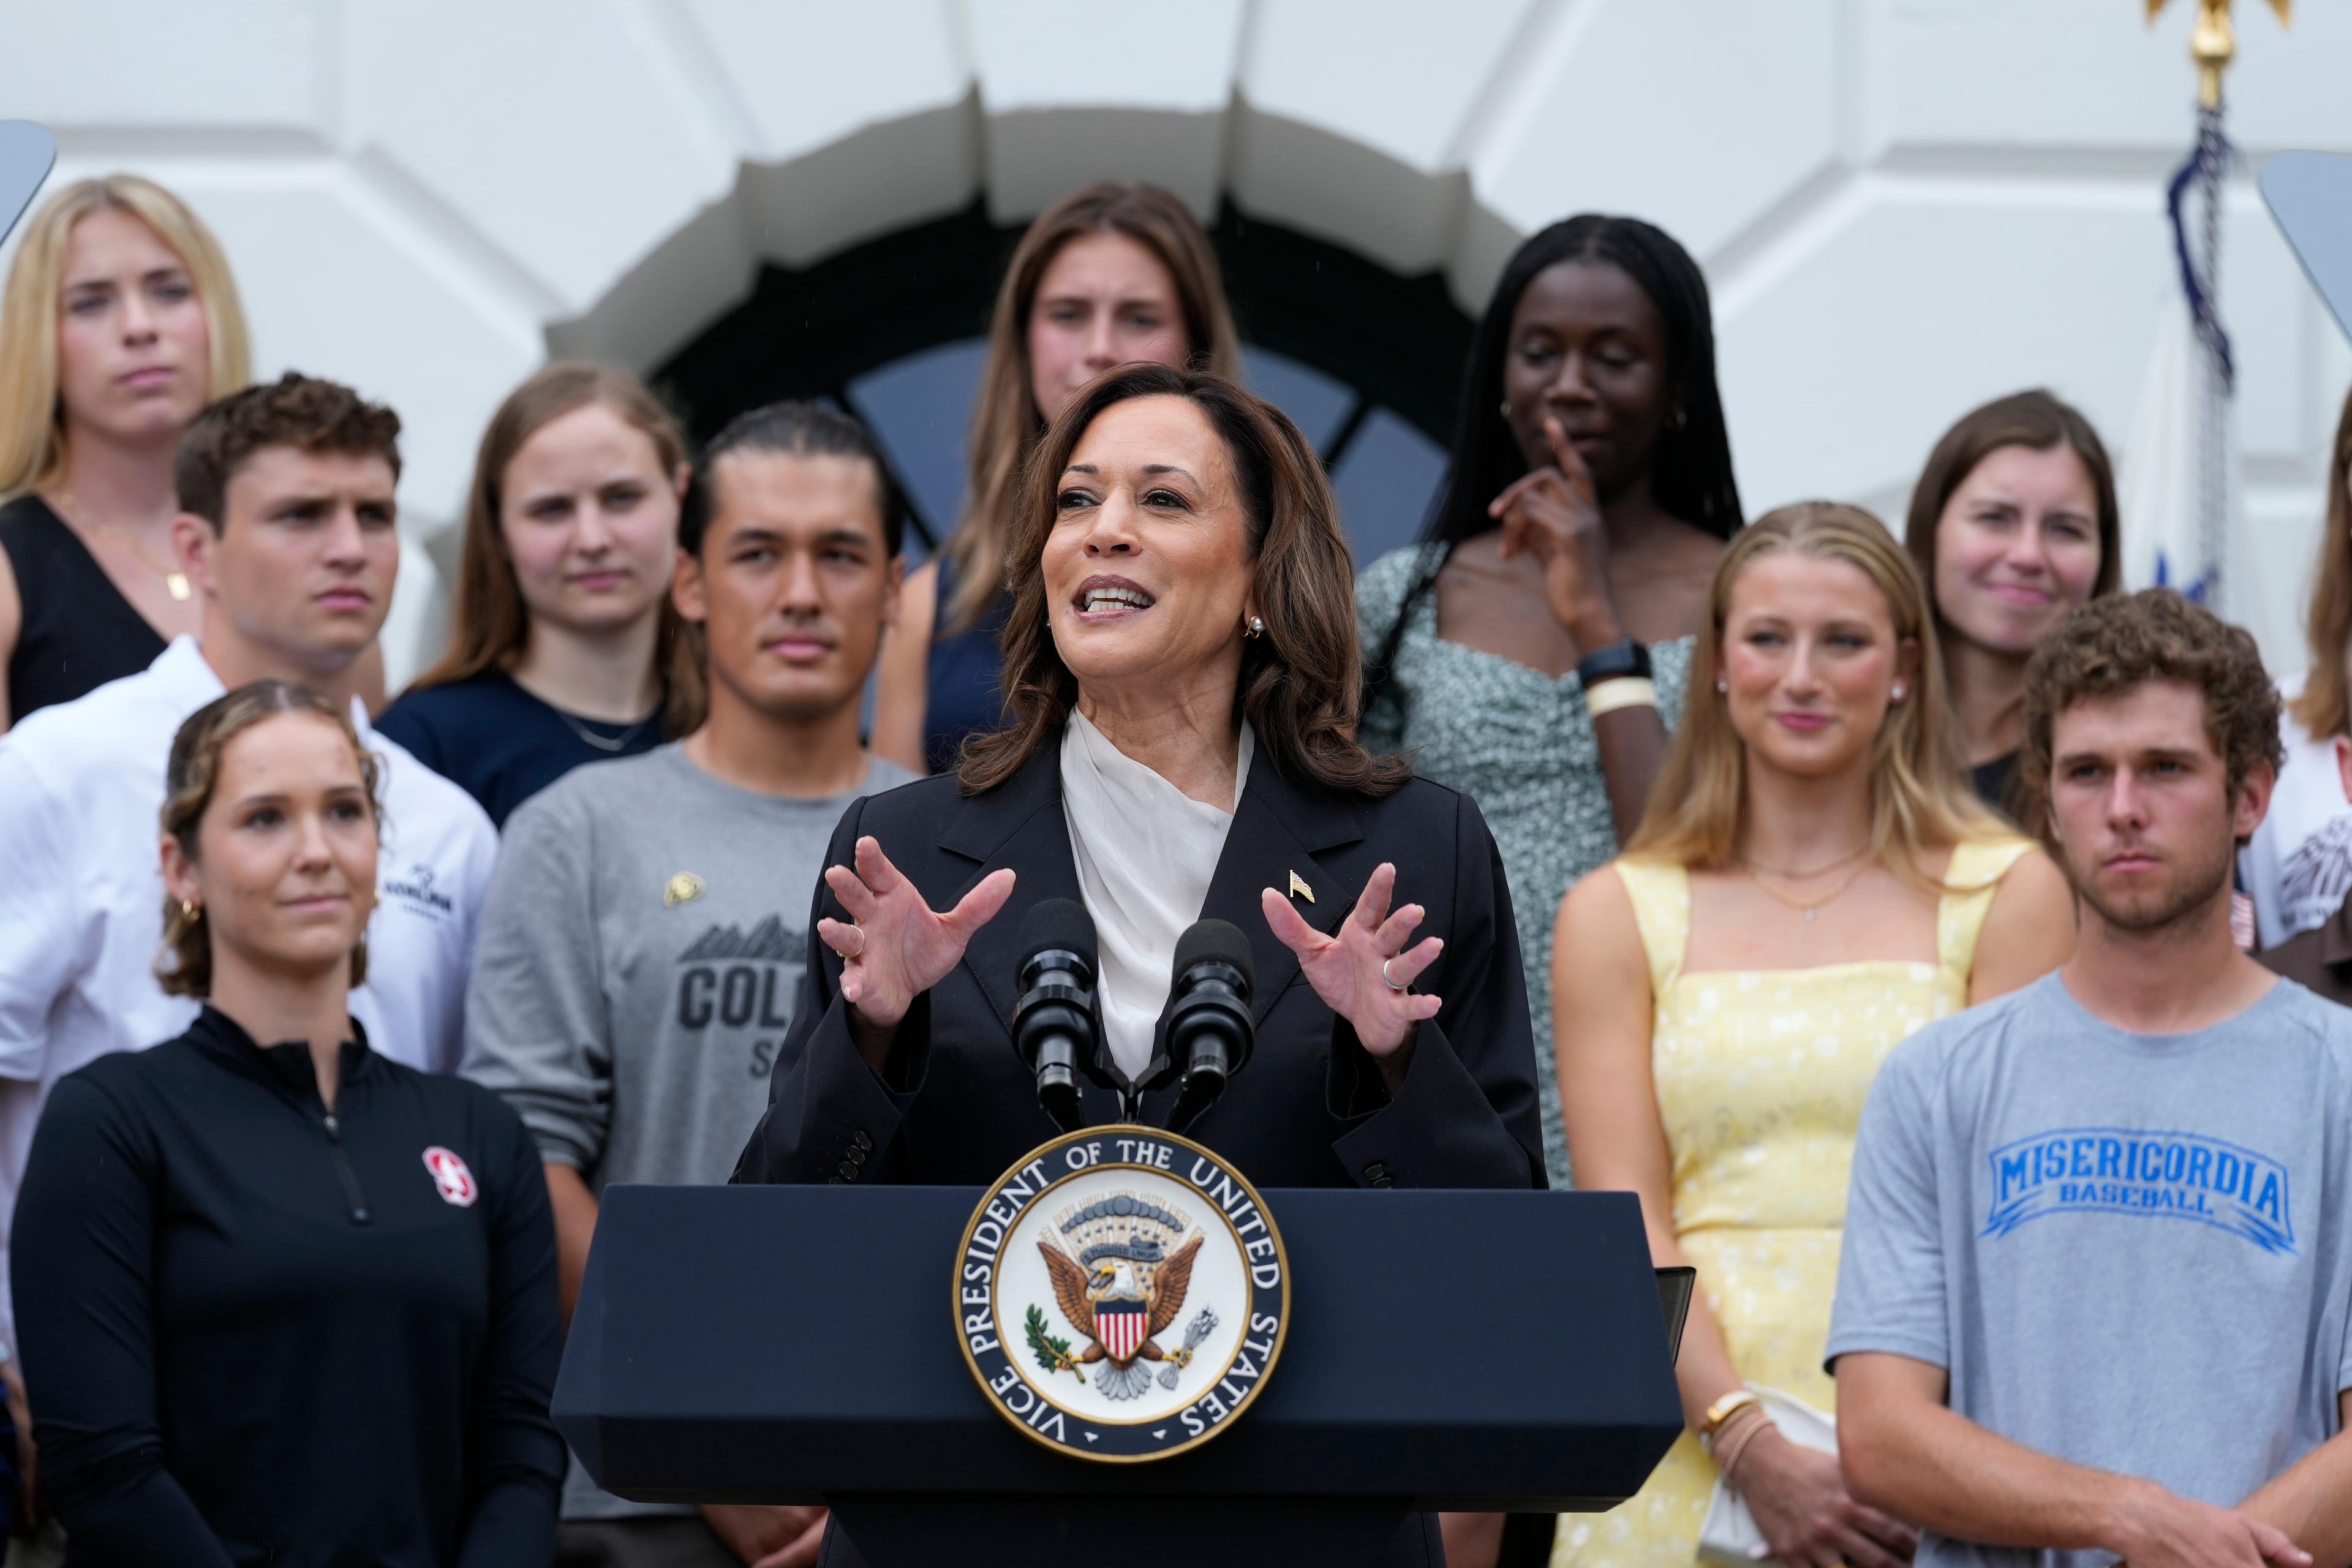 Vice President Kamala Harris speaks at a podium on the South Lawn of the White House at a navy podium with the President of the United States seal on front with two mics attached. Behind her are 11 visible college athlete. The White House is barely visible behind the students.